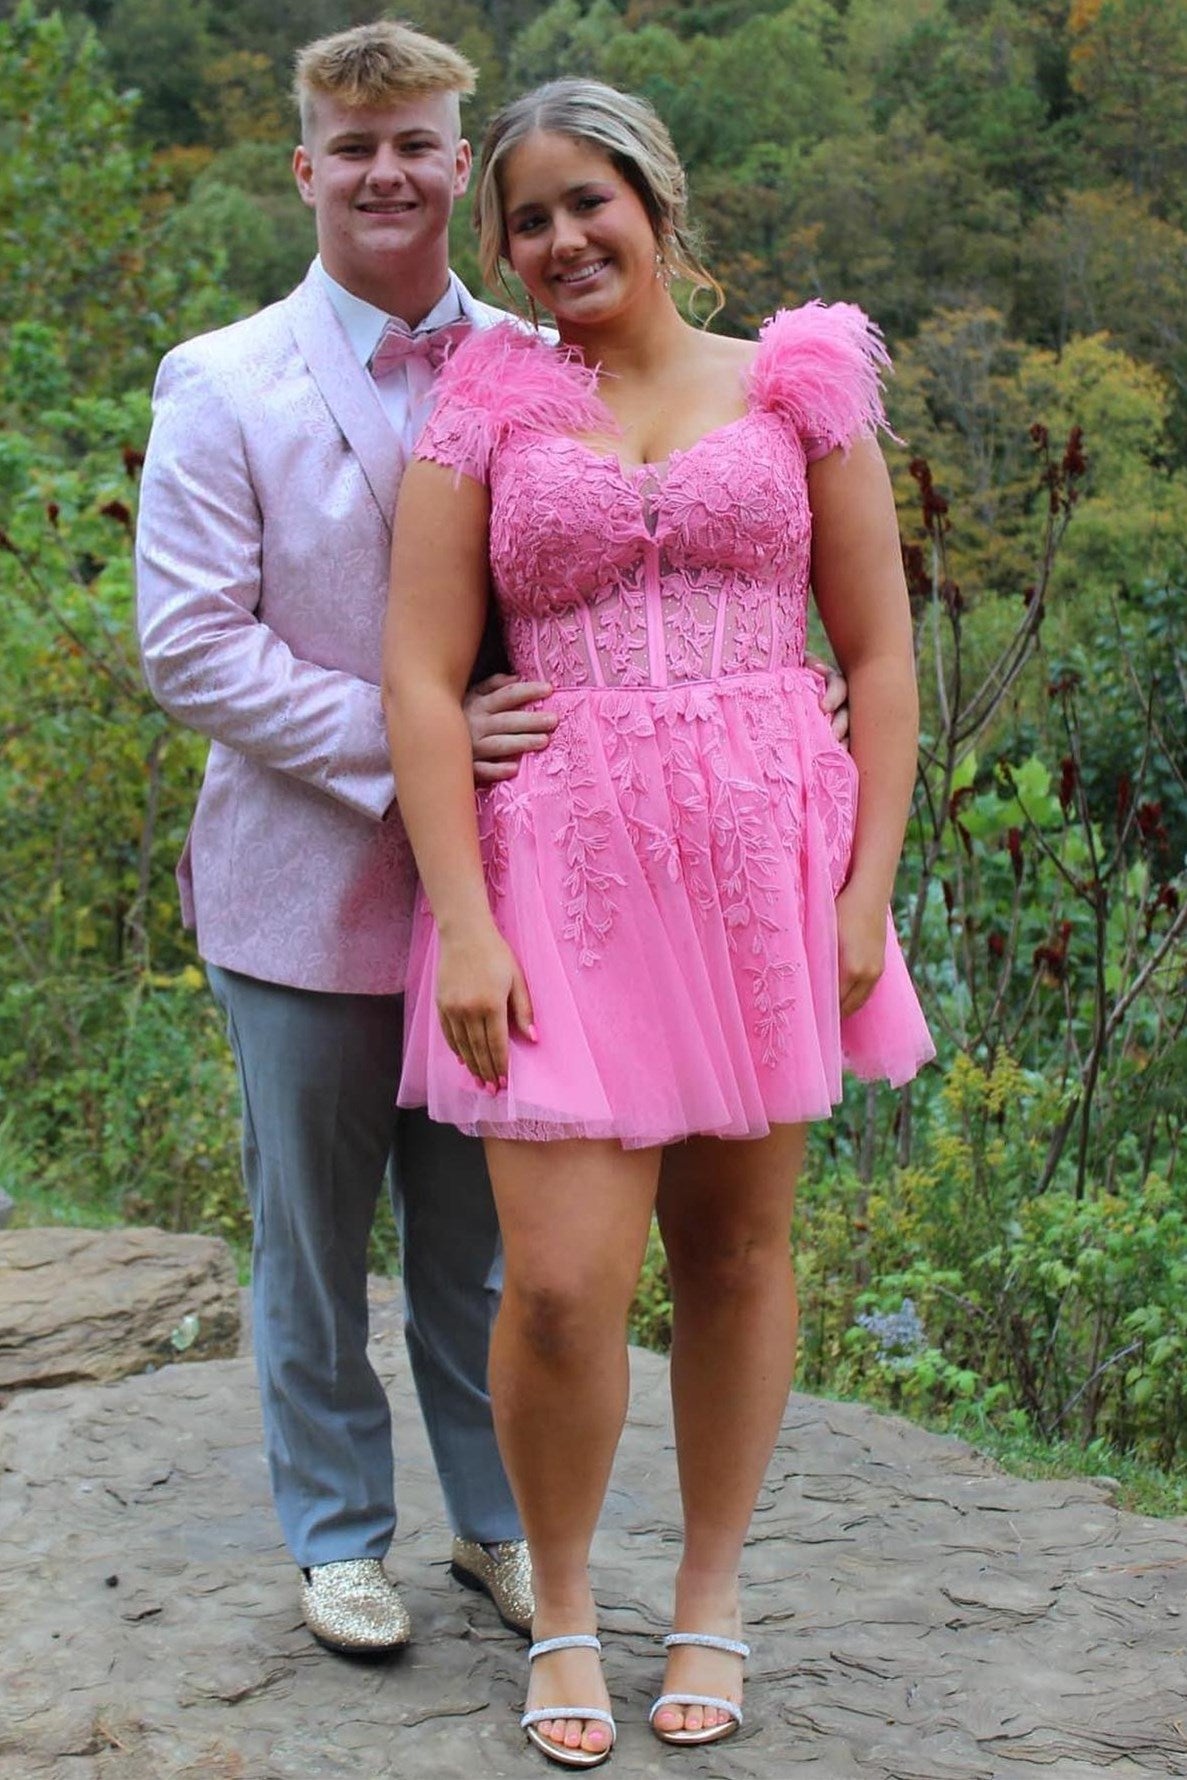 Hot Pink Prom and Hoemcoming Dresses